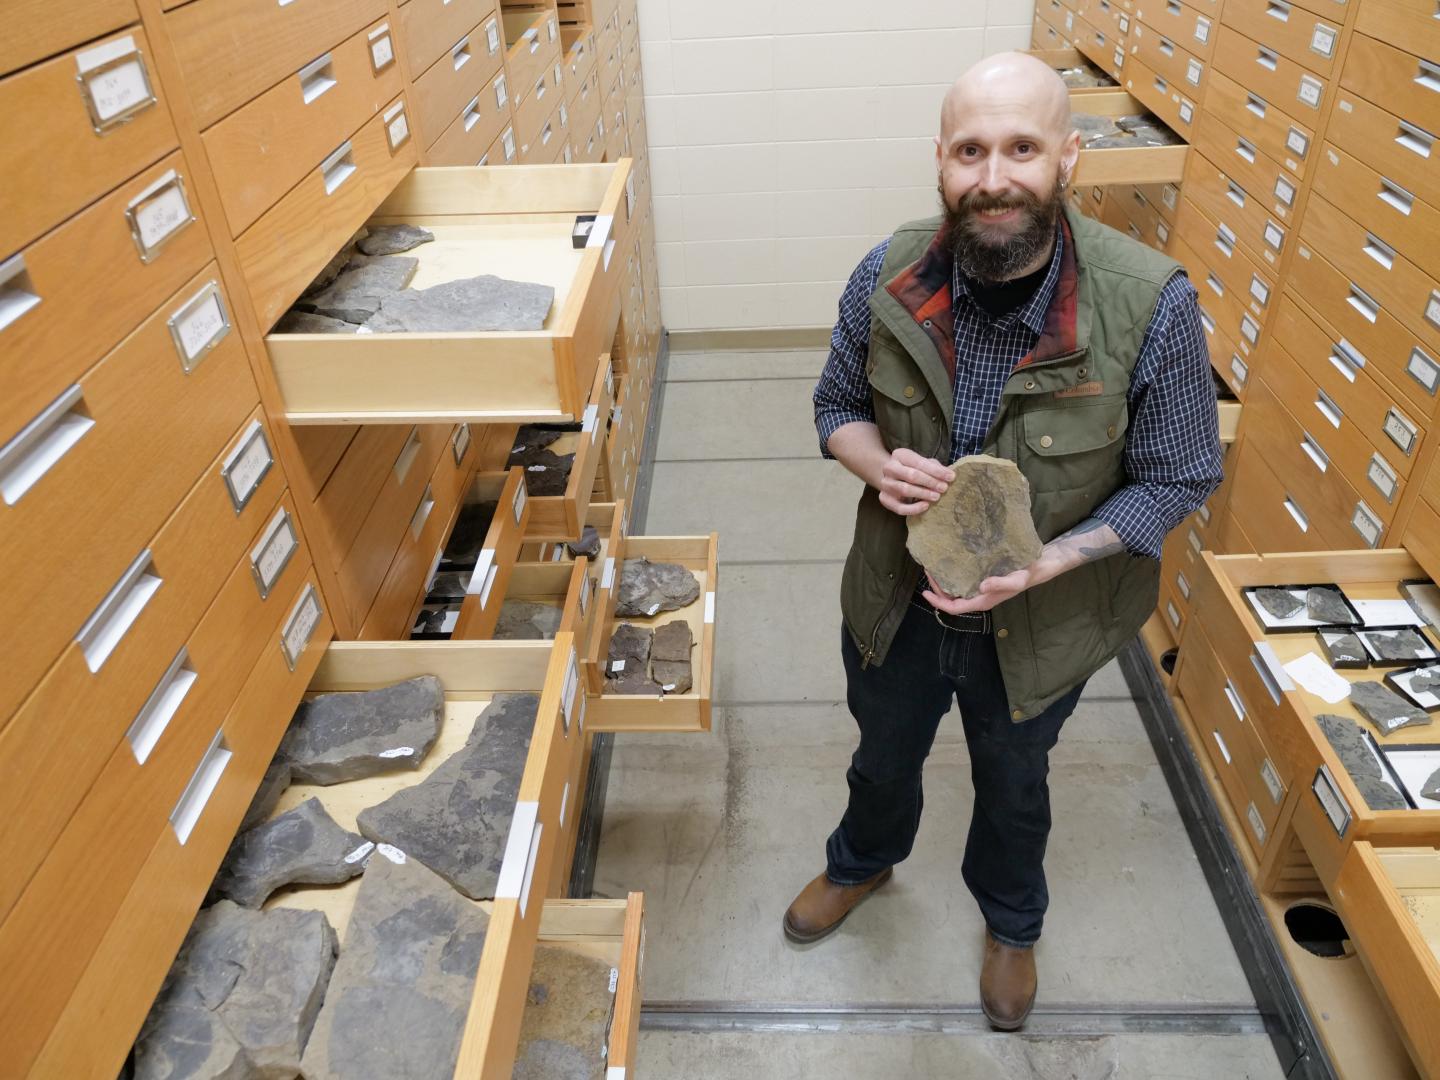 Christopher West in the USask fossil collection